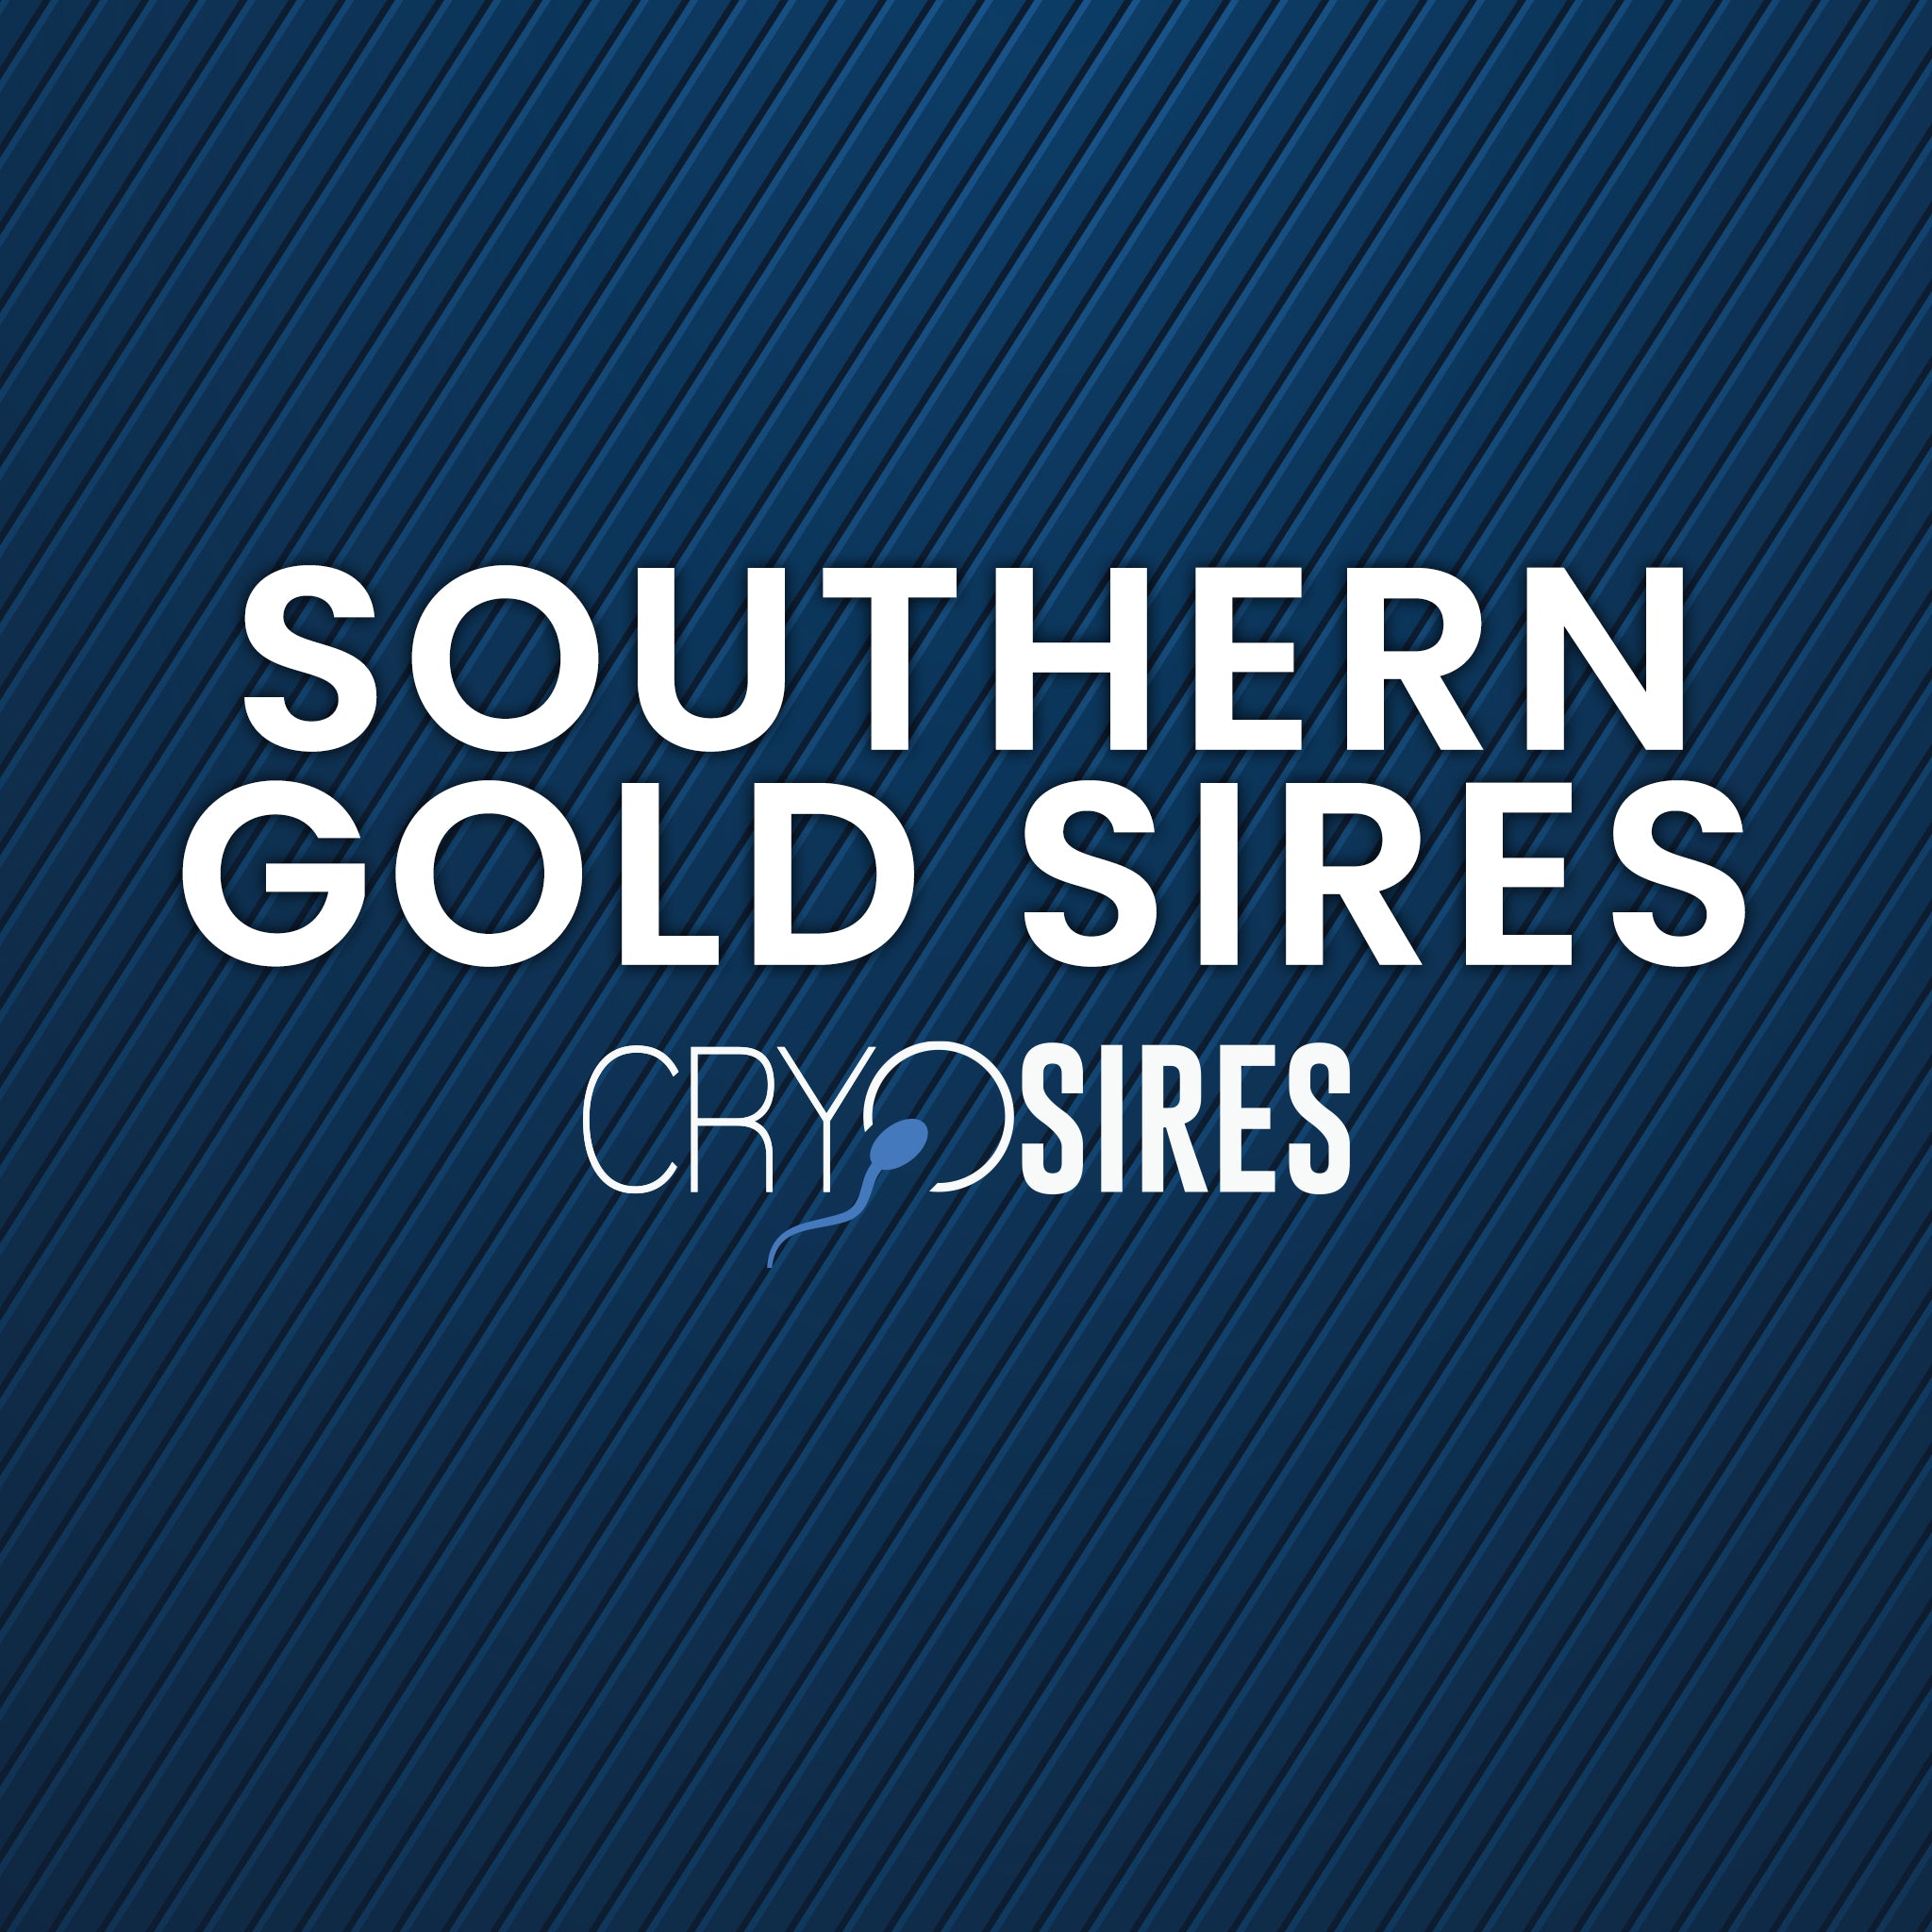 Southern Gold Sires